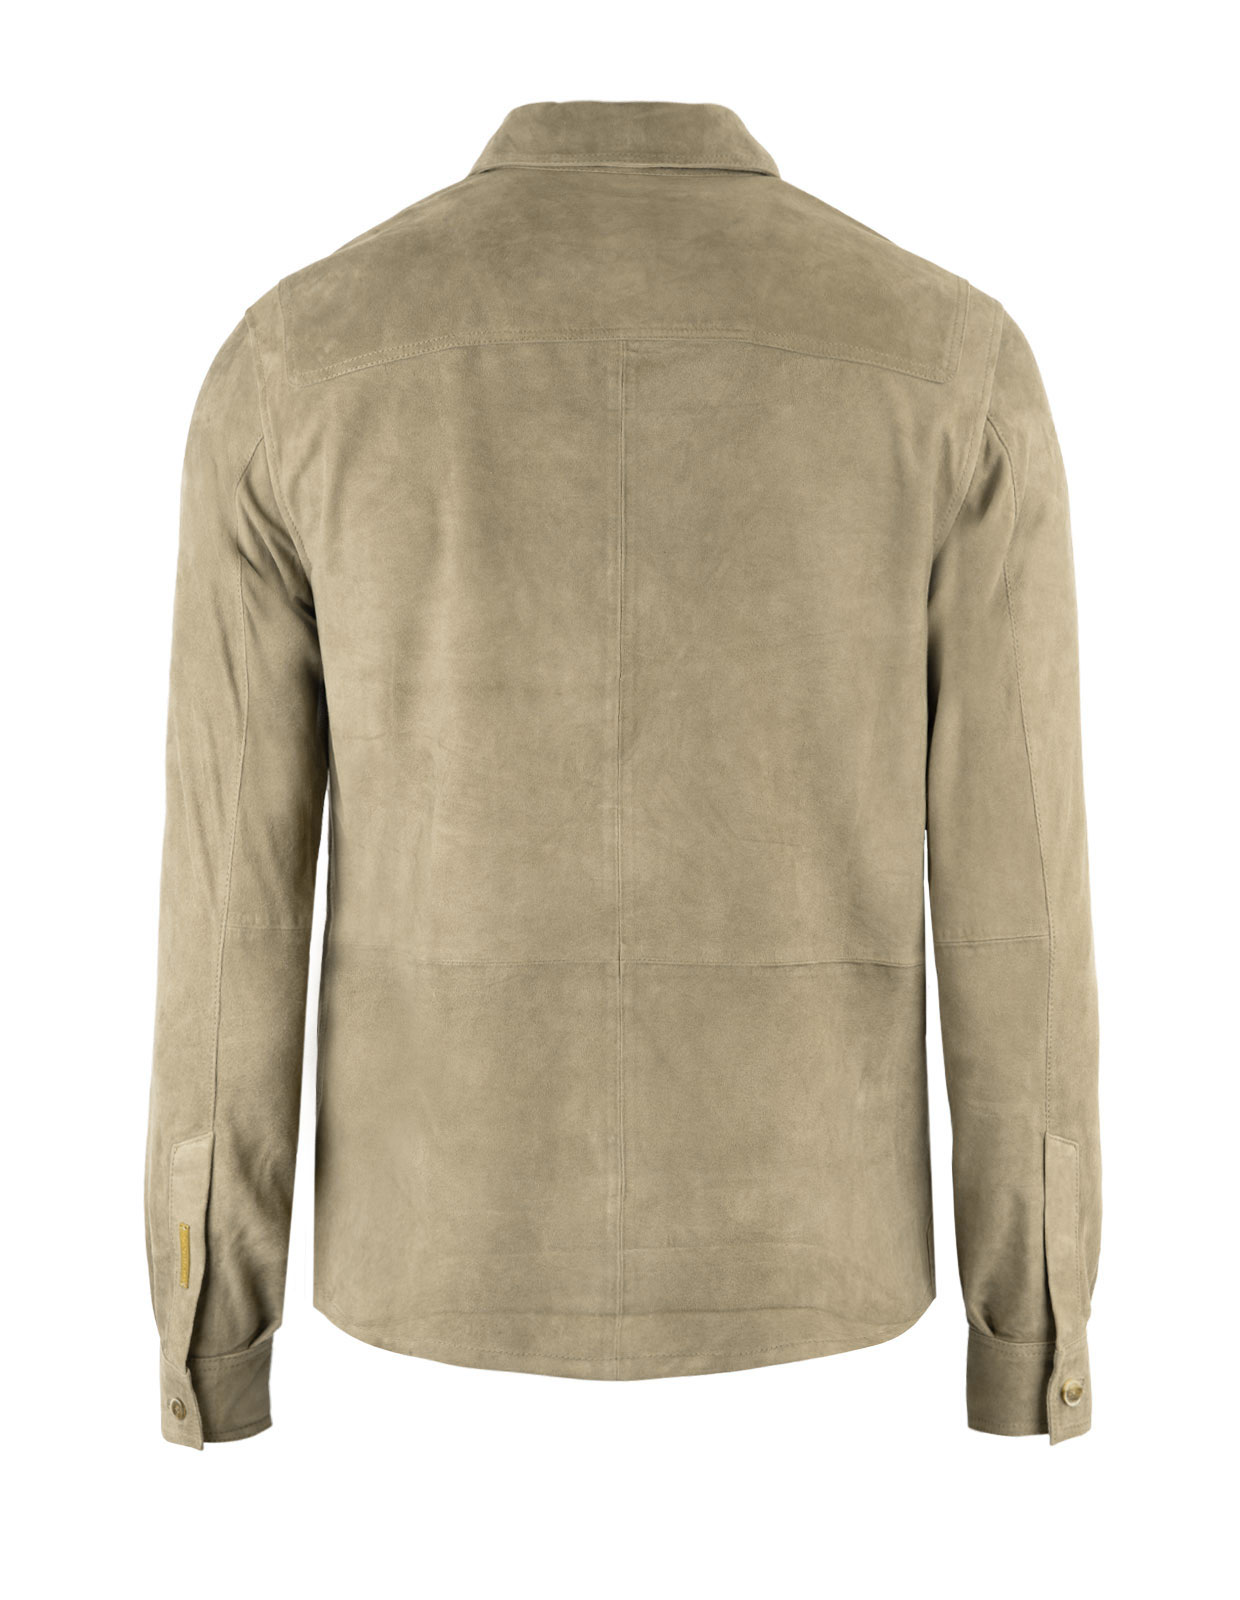 Chemise Suede Shirt Jacket Zap Green